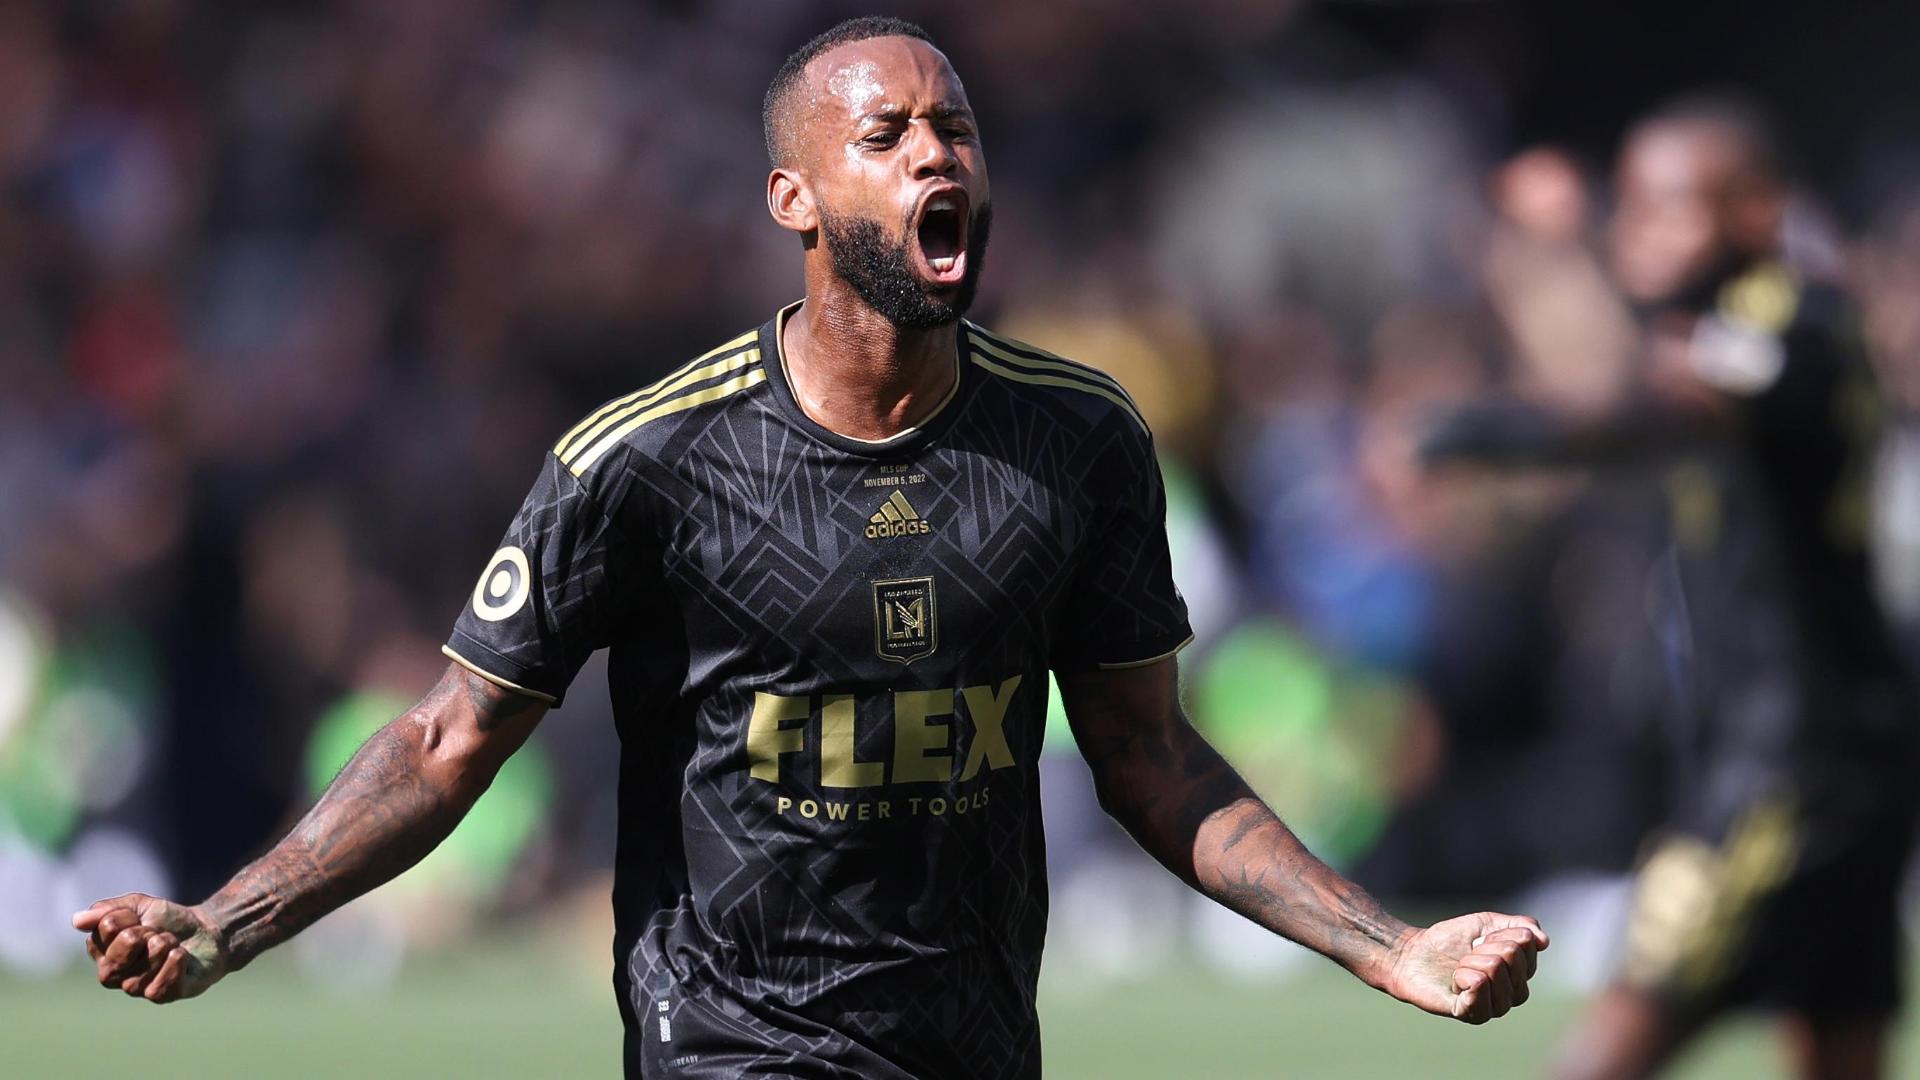 LAFC claims first MLS Cup title with shootout win over Union